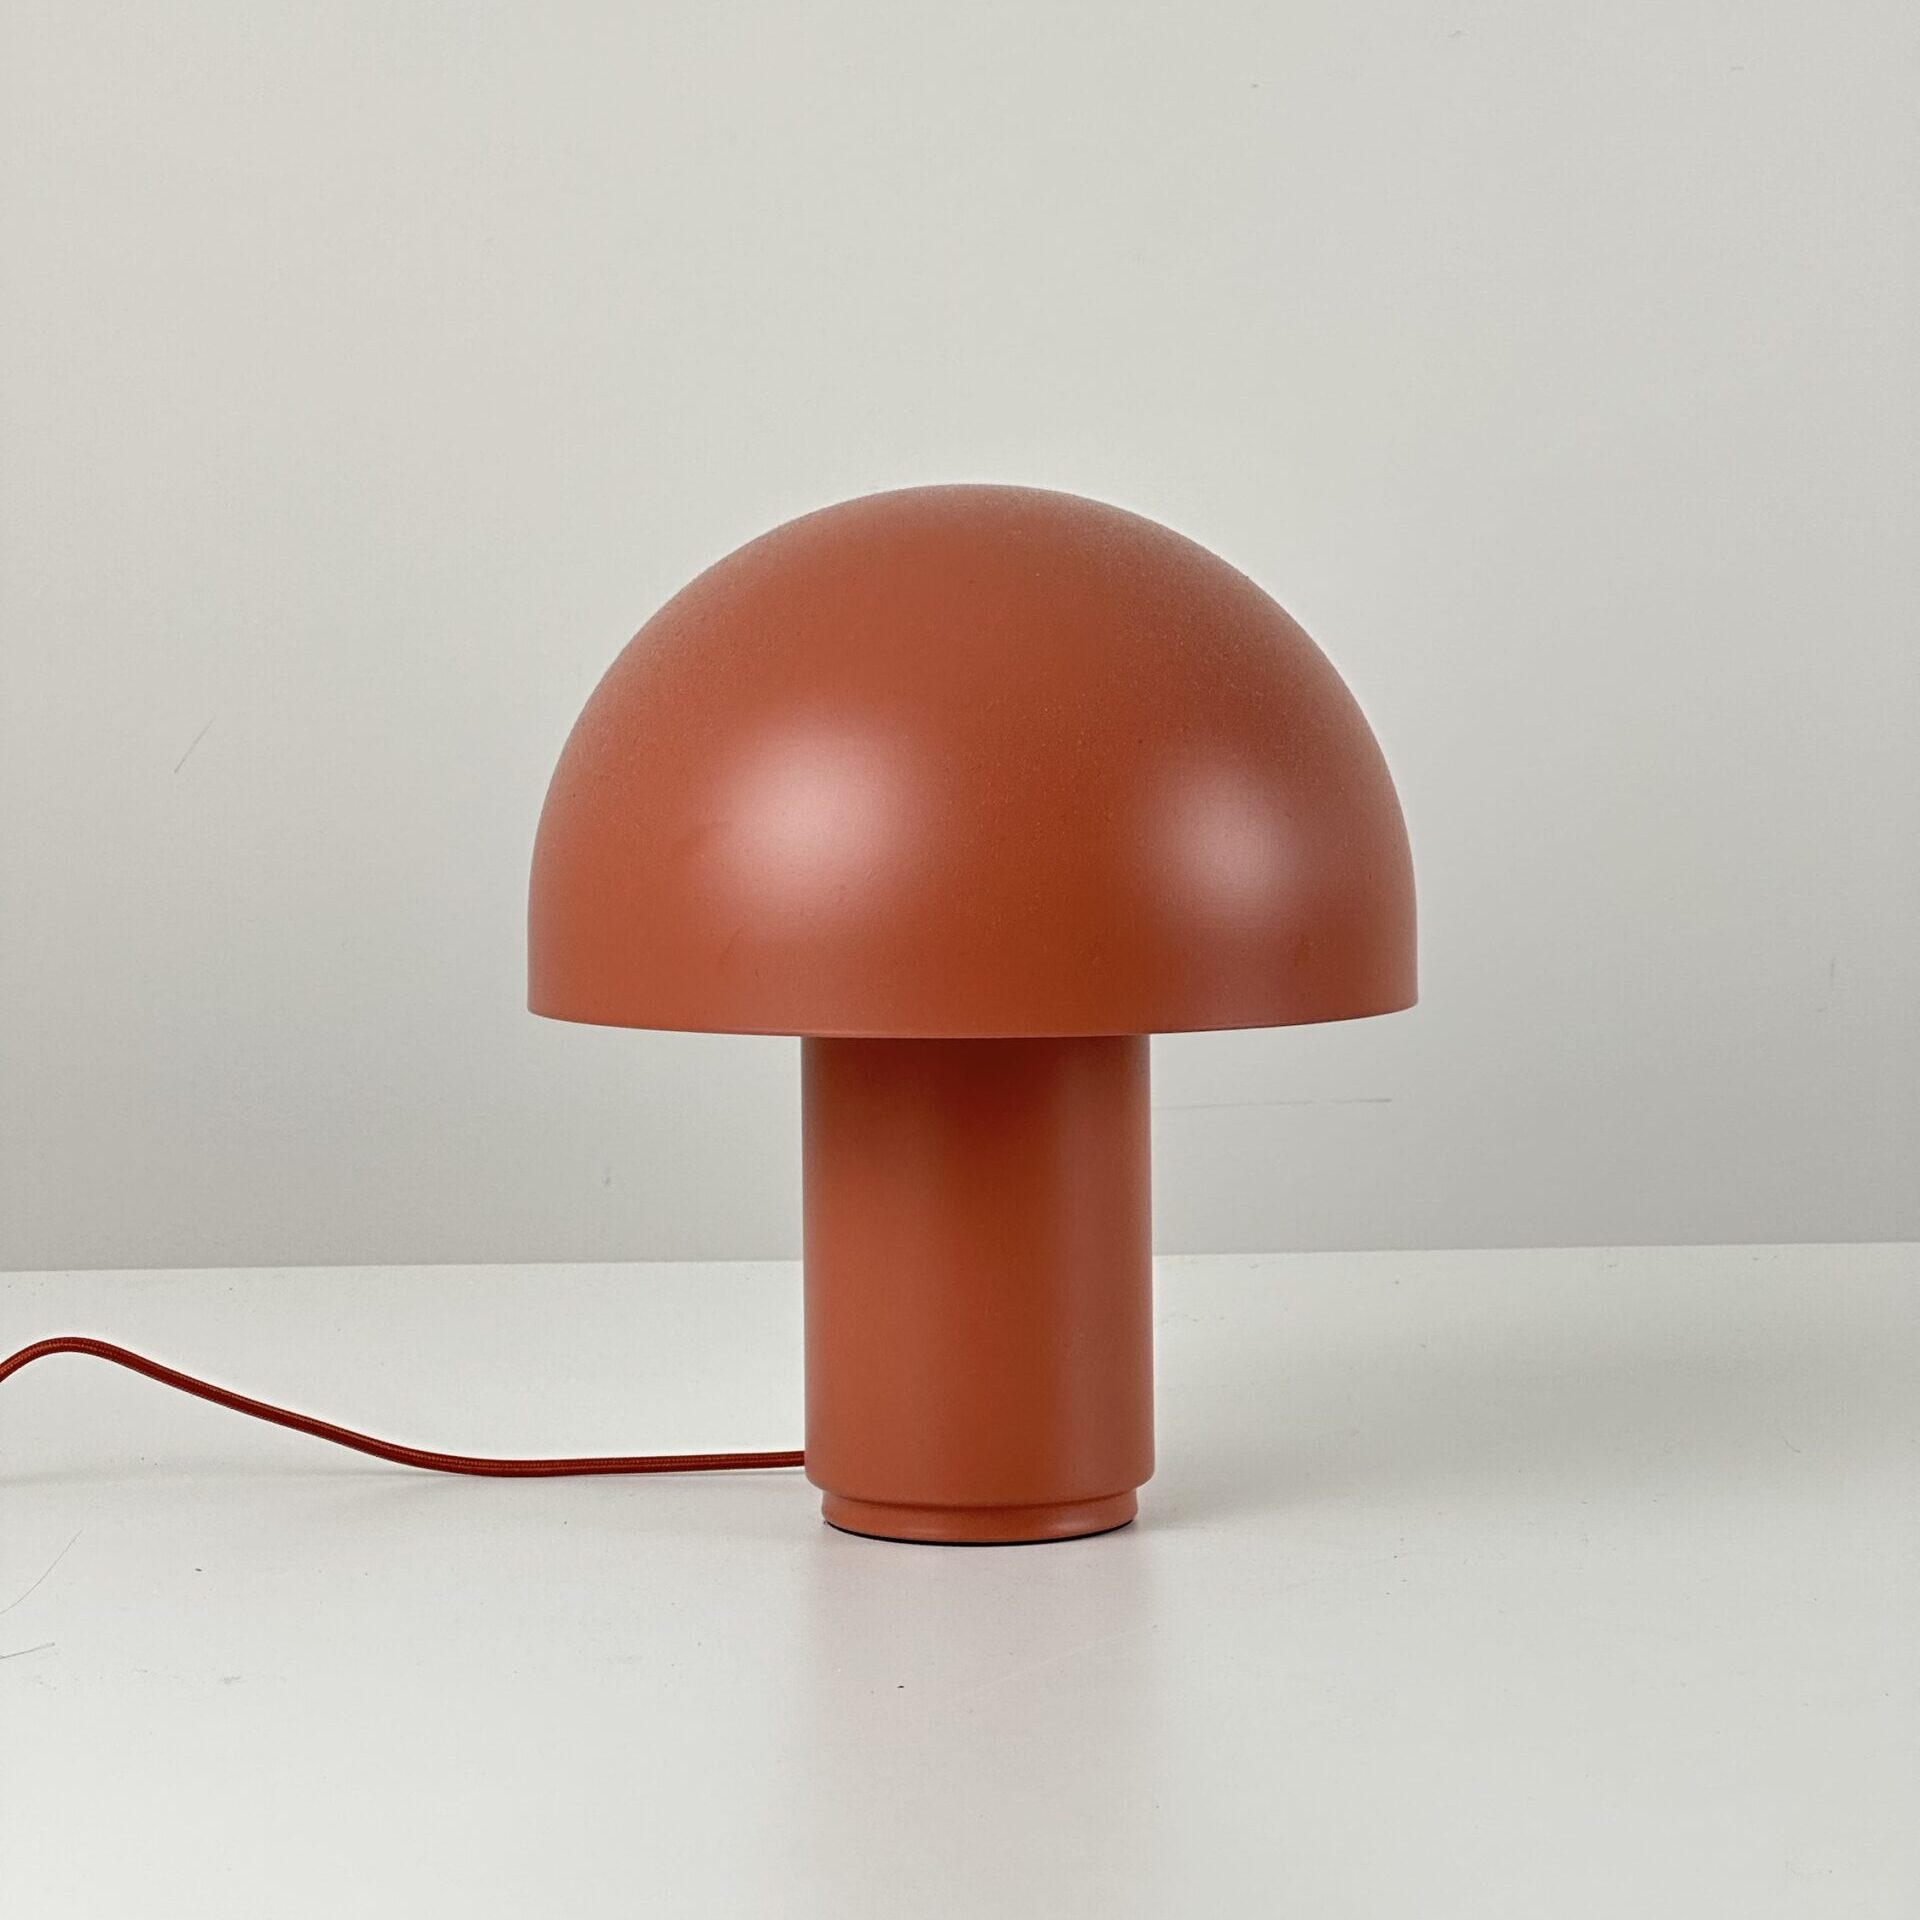 Modern Dome-Shaped Table Lamp – Warm Rust 30cm – Ex-Display